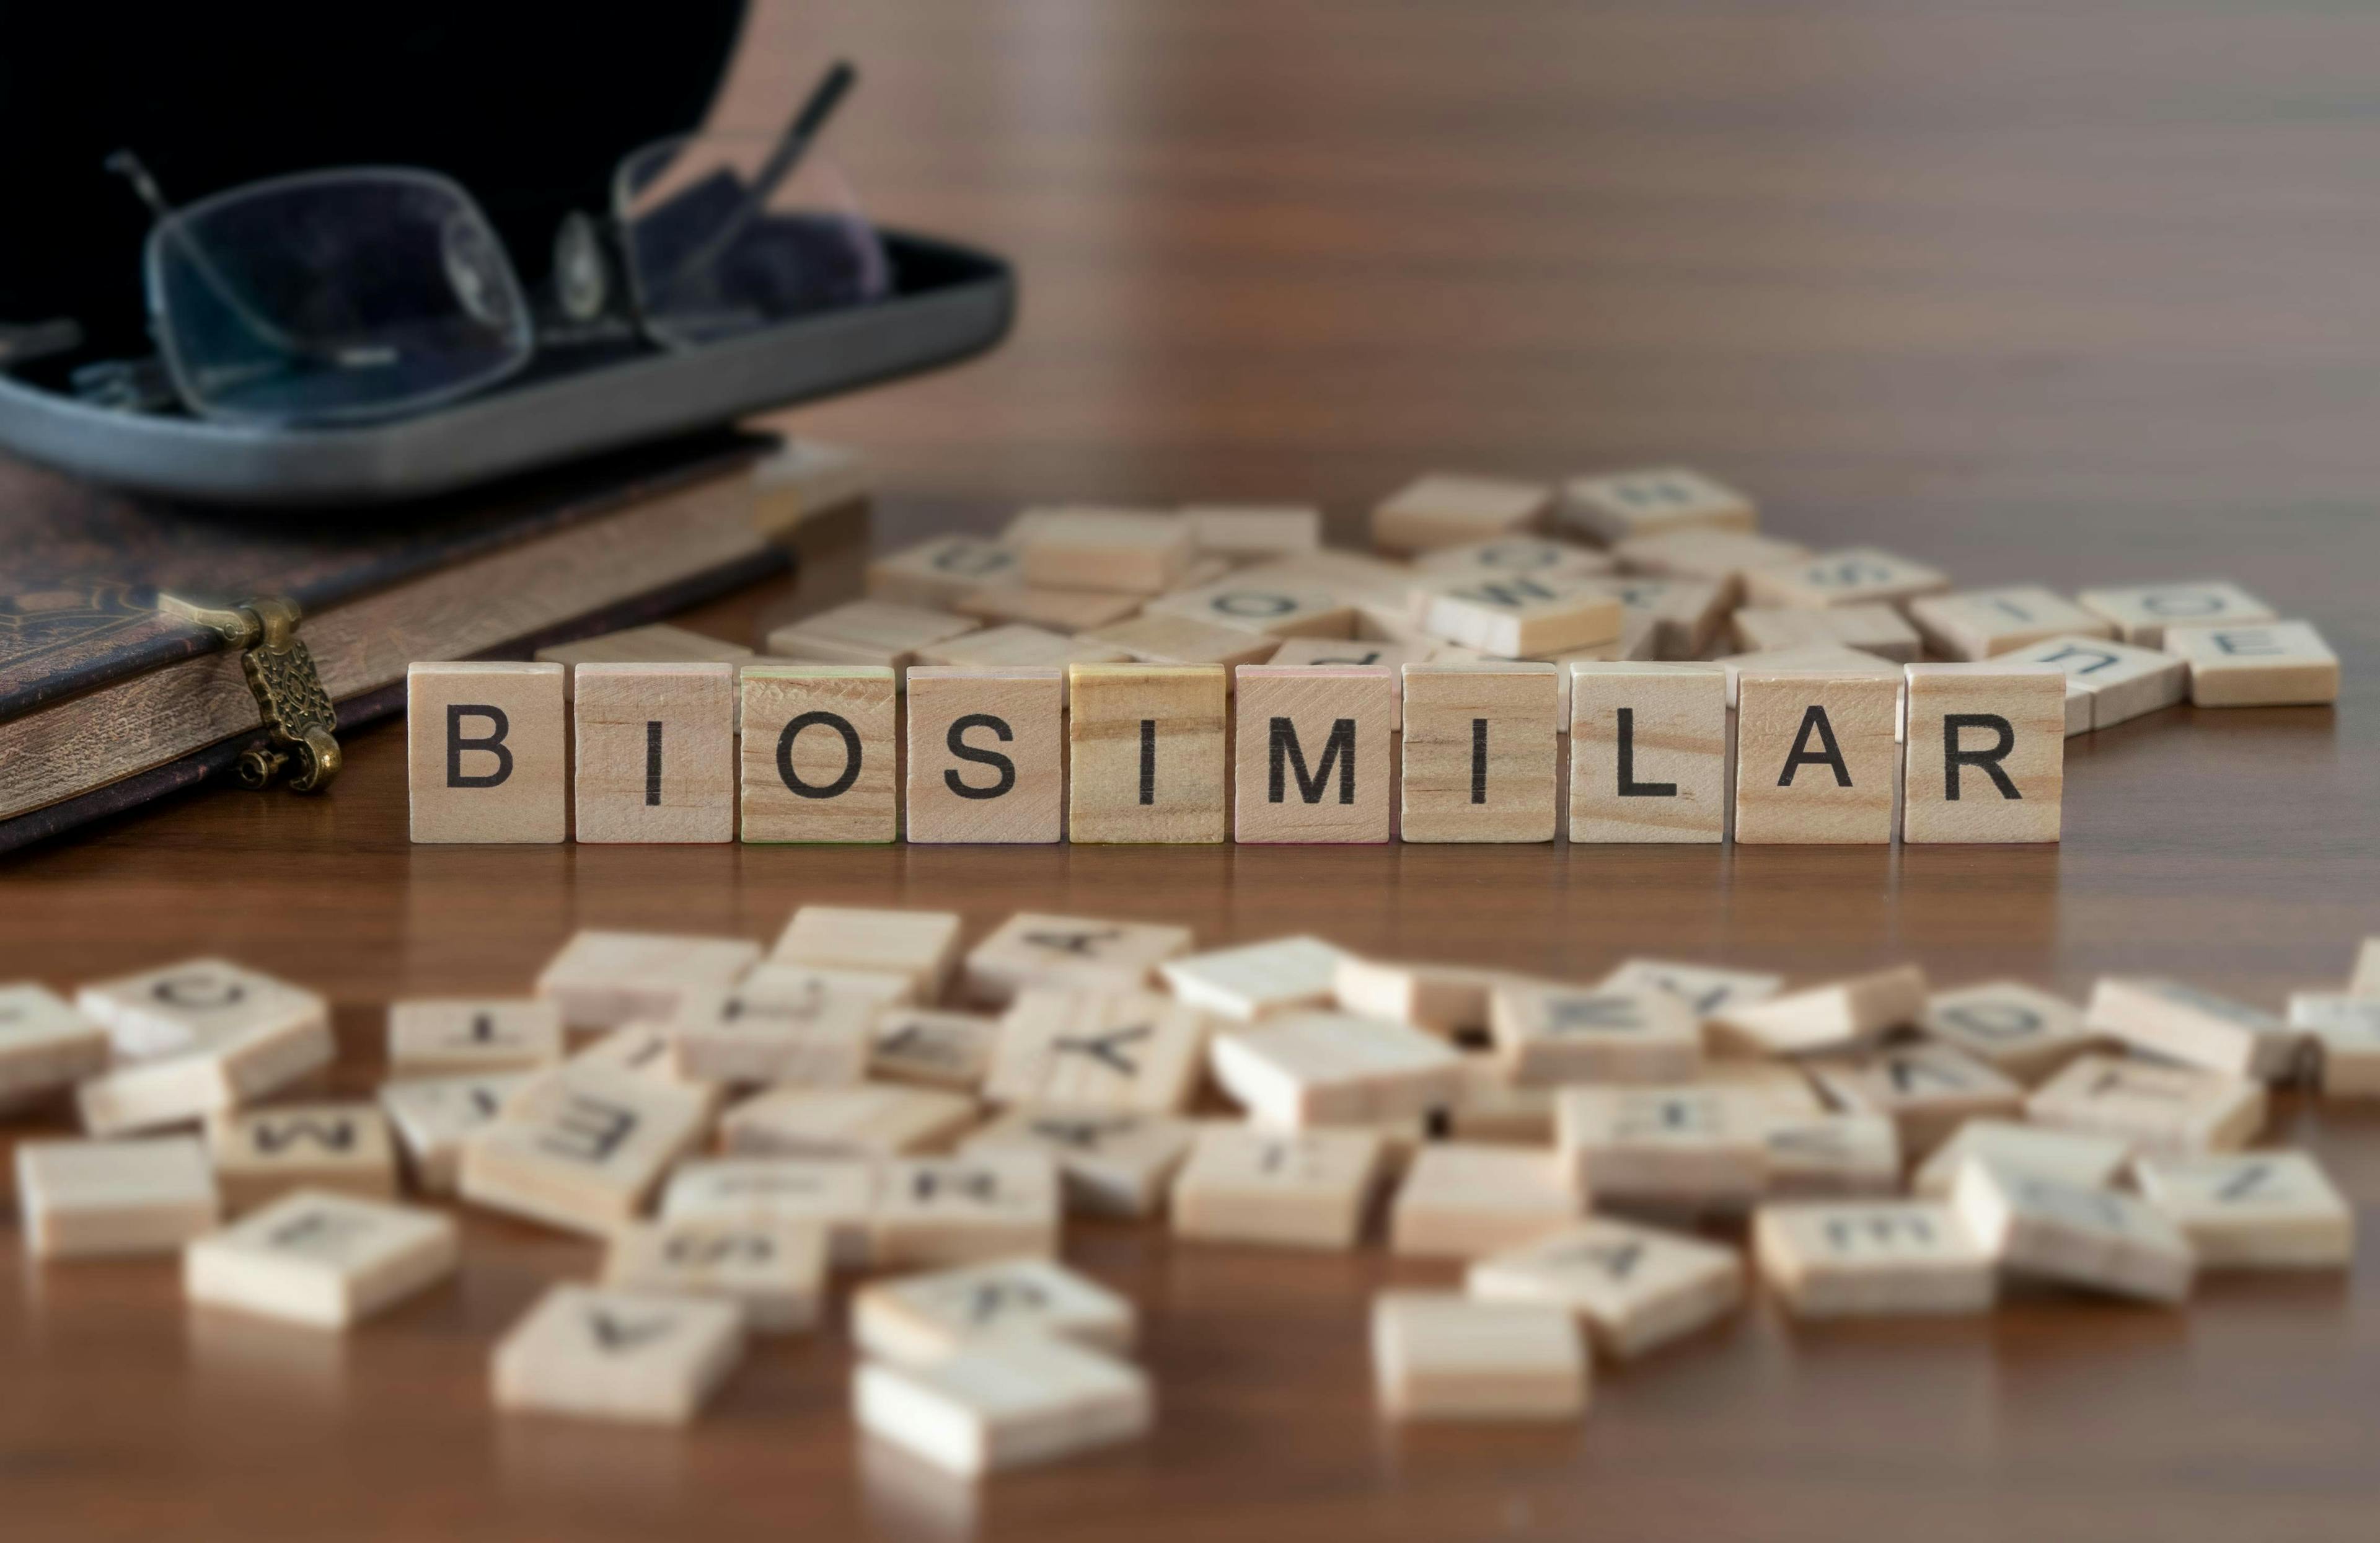 biosimilar word or concept represented by wooden letter tiles on a wooden table with glasses and a book